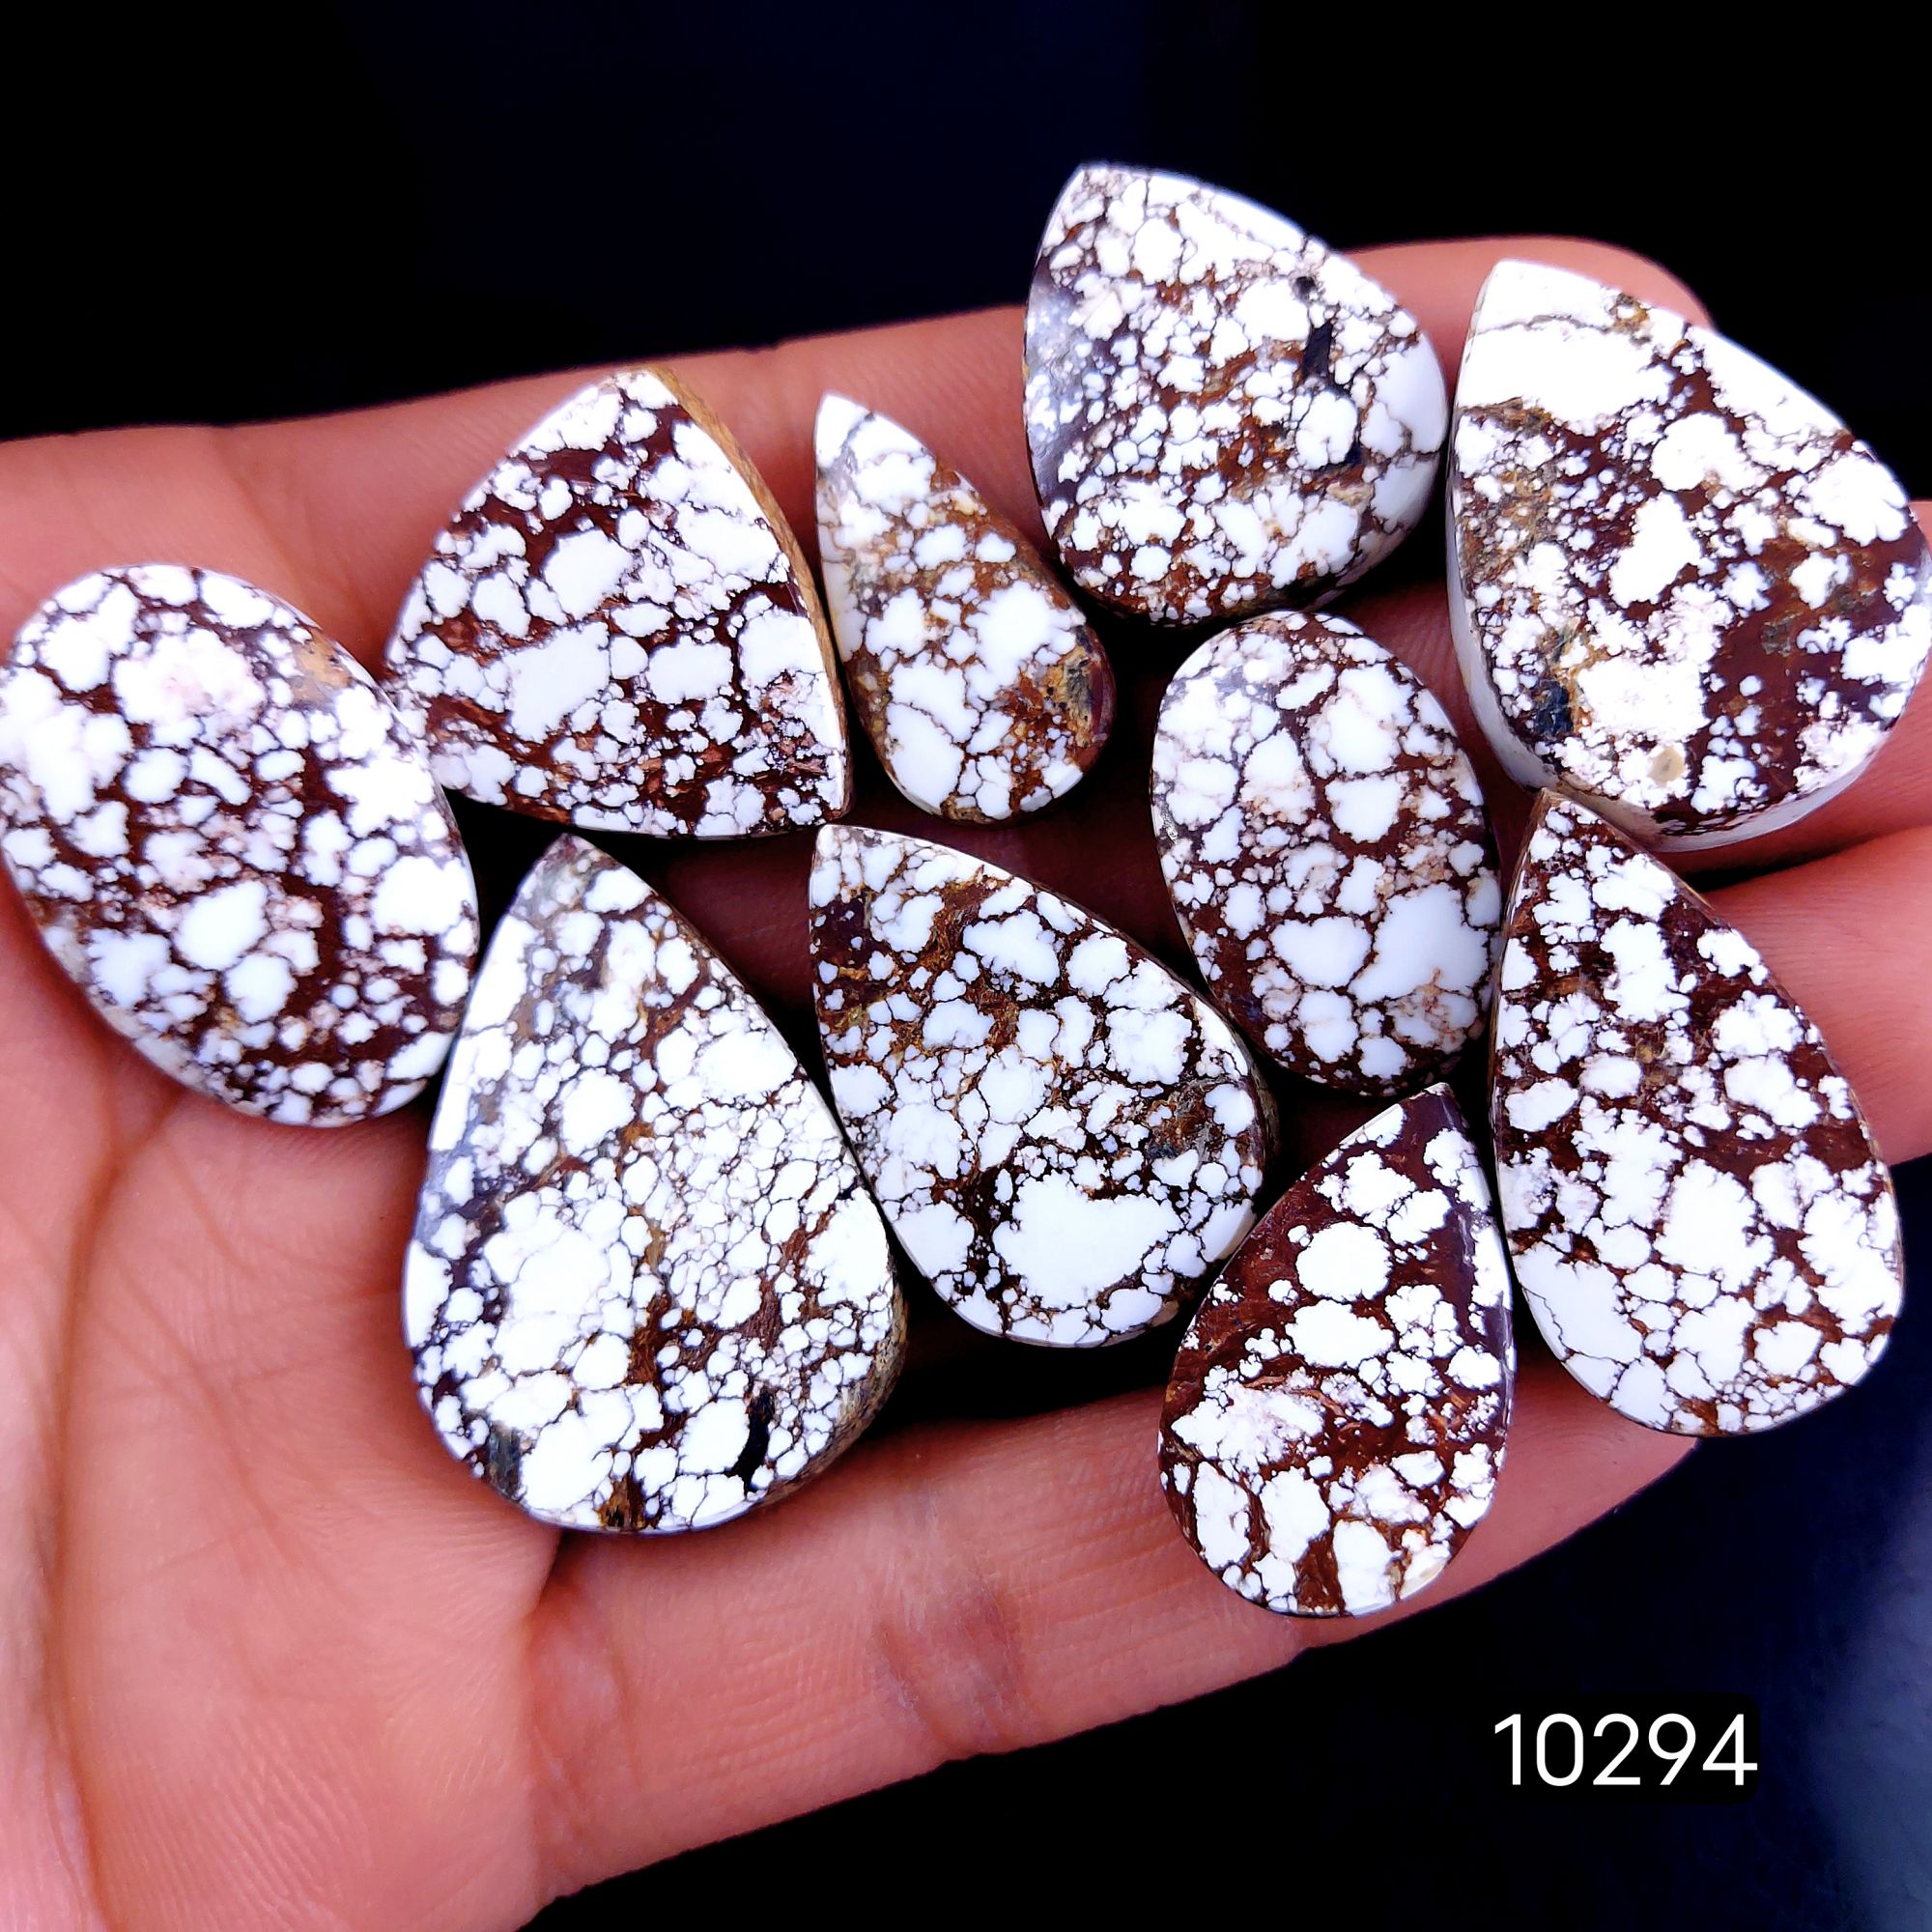 10Pc 277Cts Natural Wild Horse Magnesite Turquoise Cabochon Polished Loose Gemstone Flat Back Multi Jewelry Making Crystal  36x25 25x14mm #10294